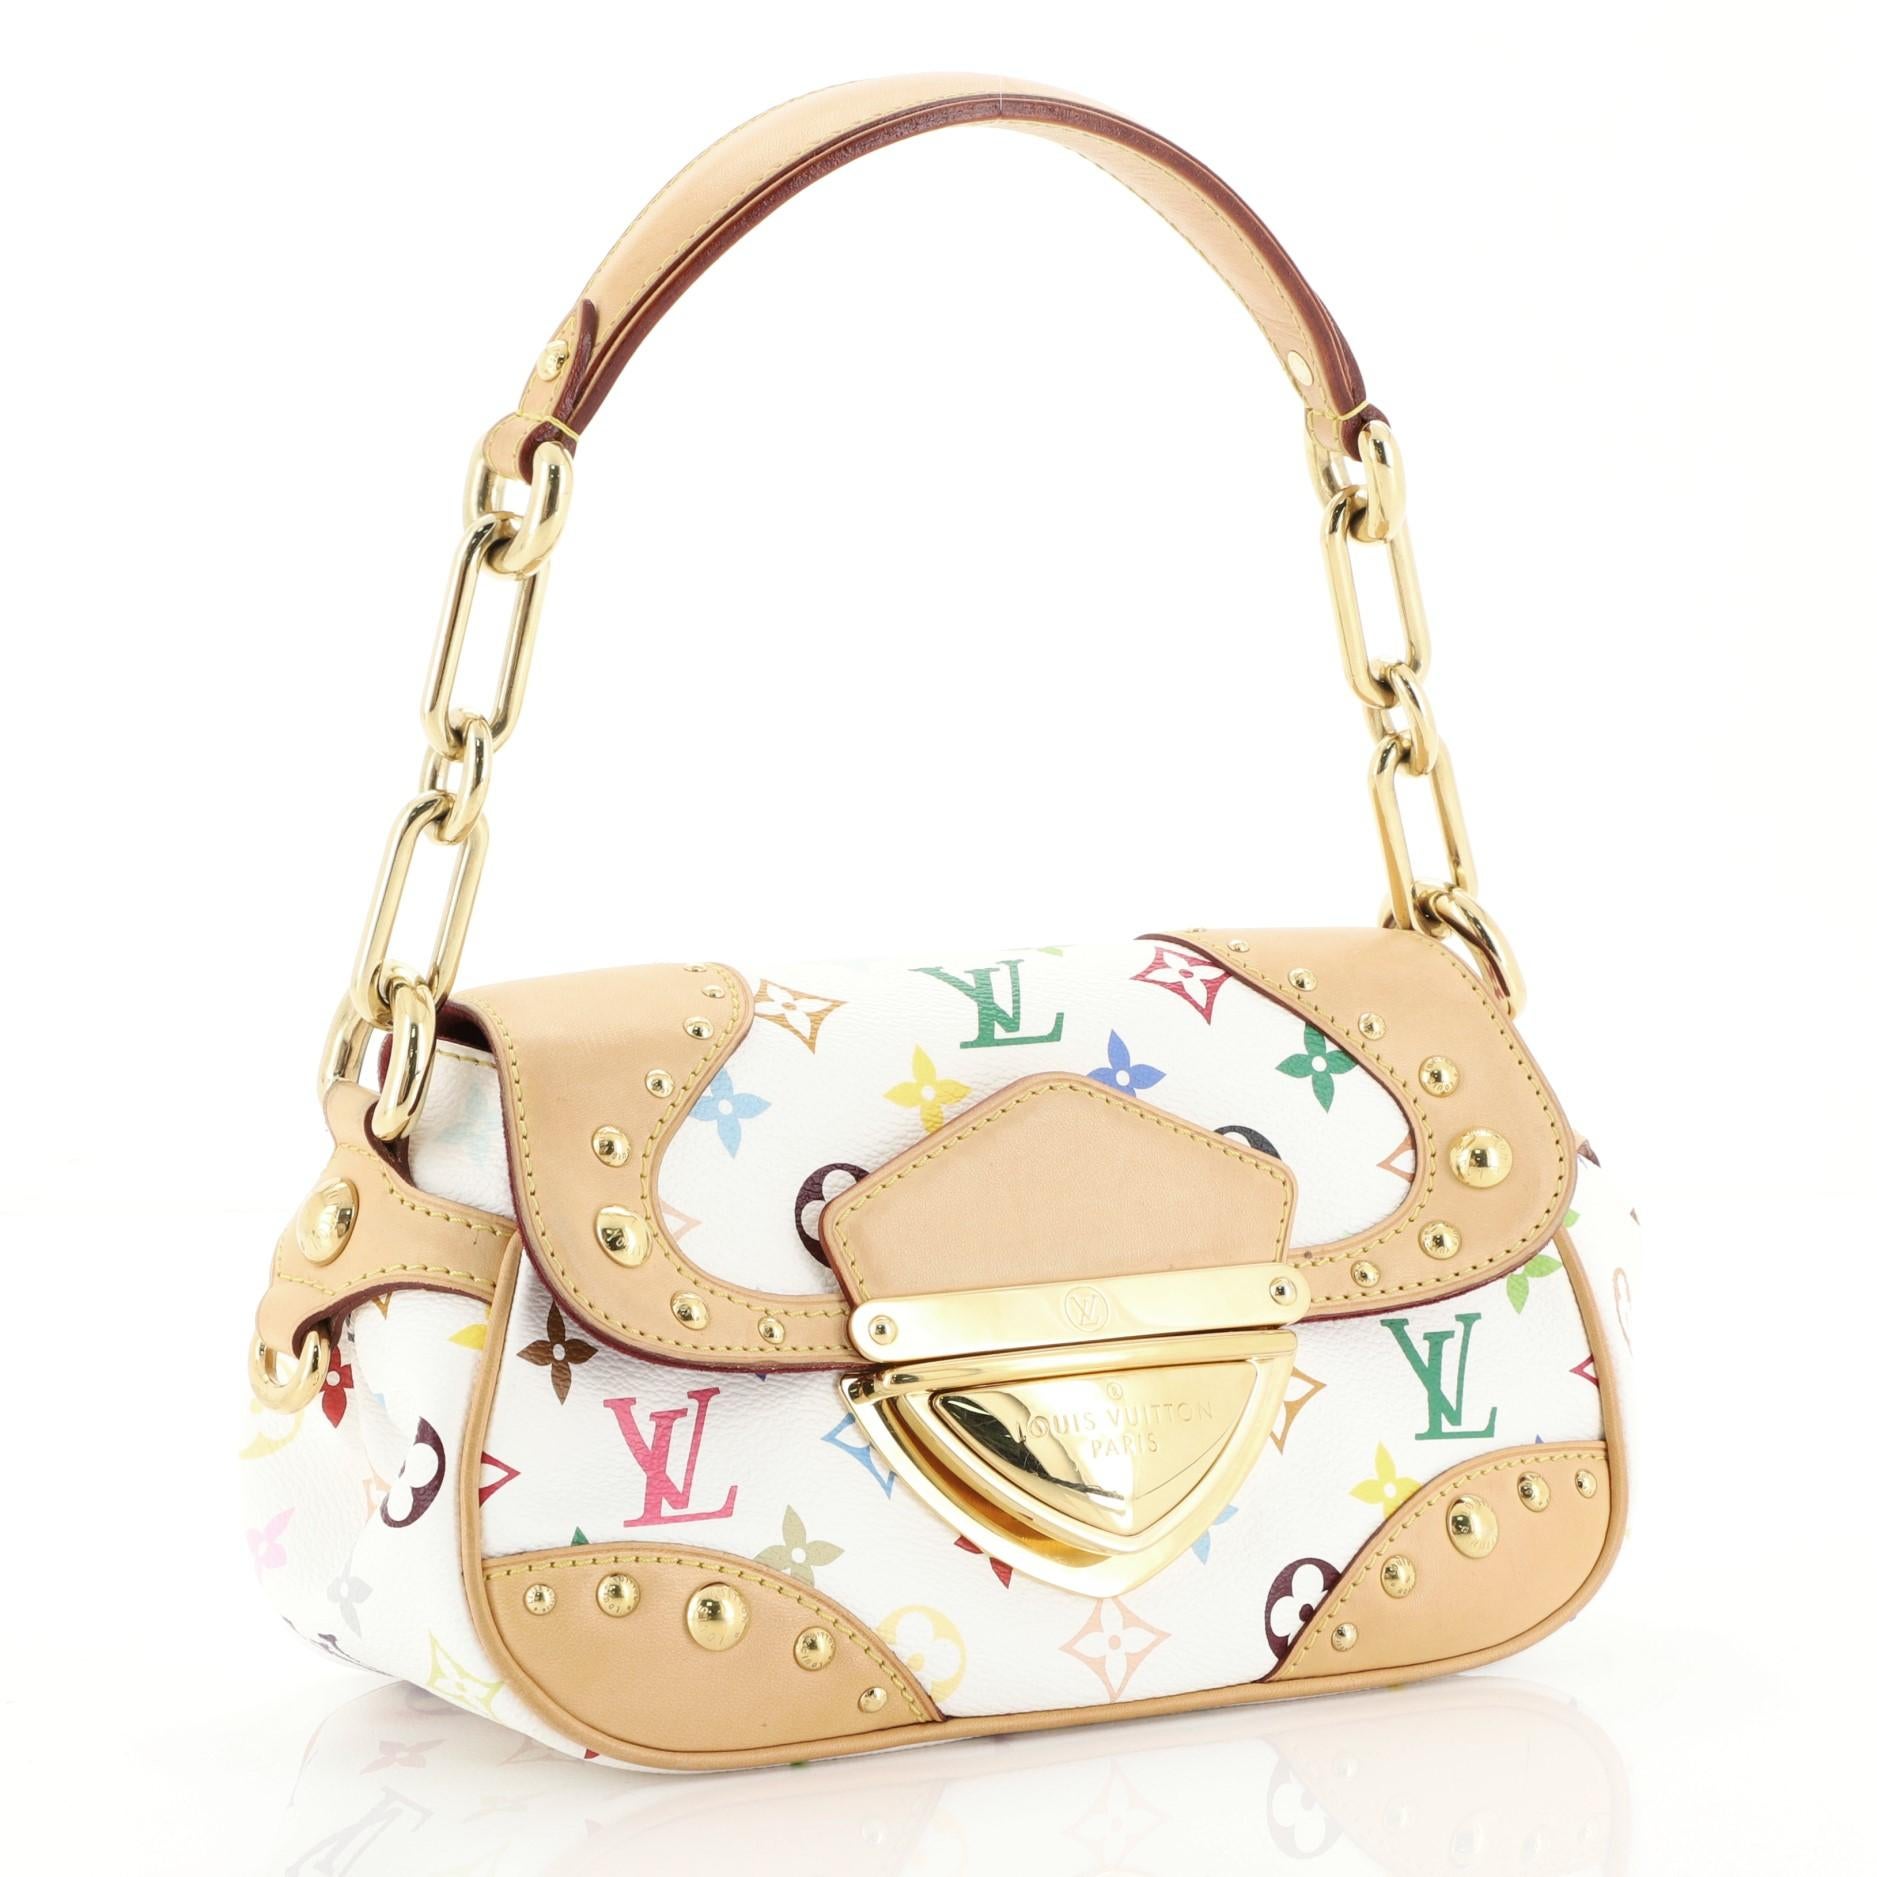 This Louis Vuitton Marilyn Handbag Monogram Multicolor, crafted from white monogram multicolor coated canvas, features vachetta leather handle and trim, multiple studs, exterior back pocket, and gold-tone hardware. Its slide push-lock closure opens